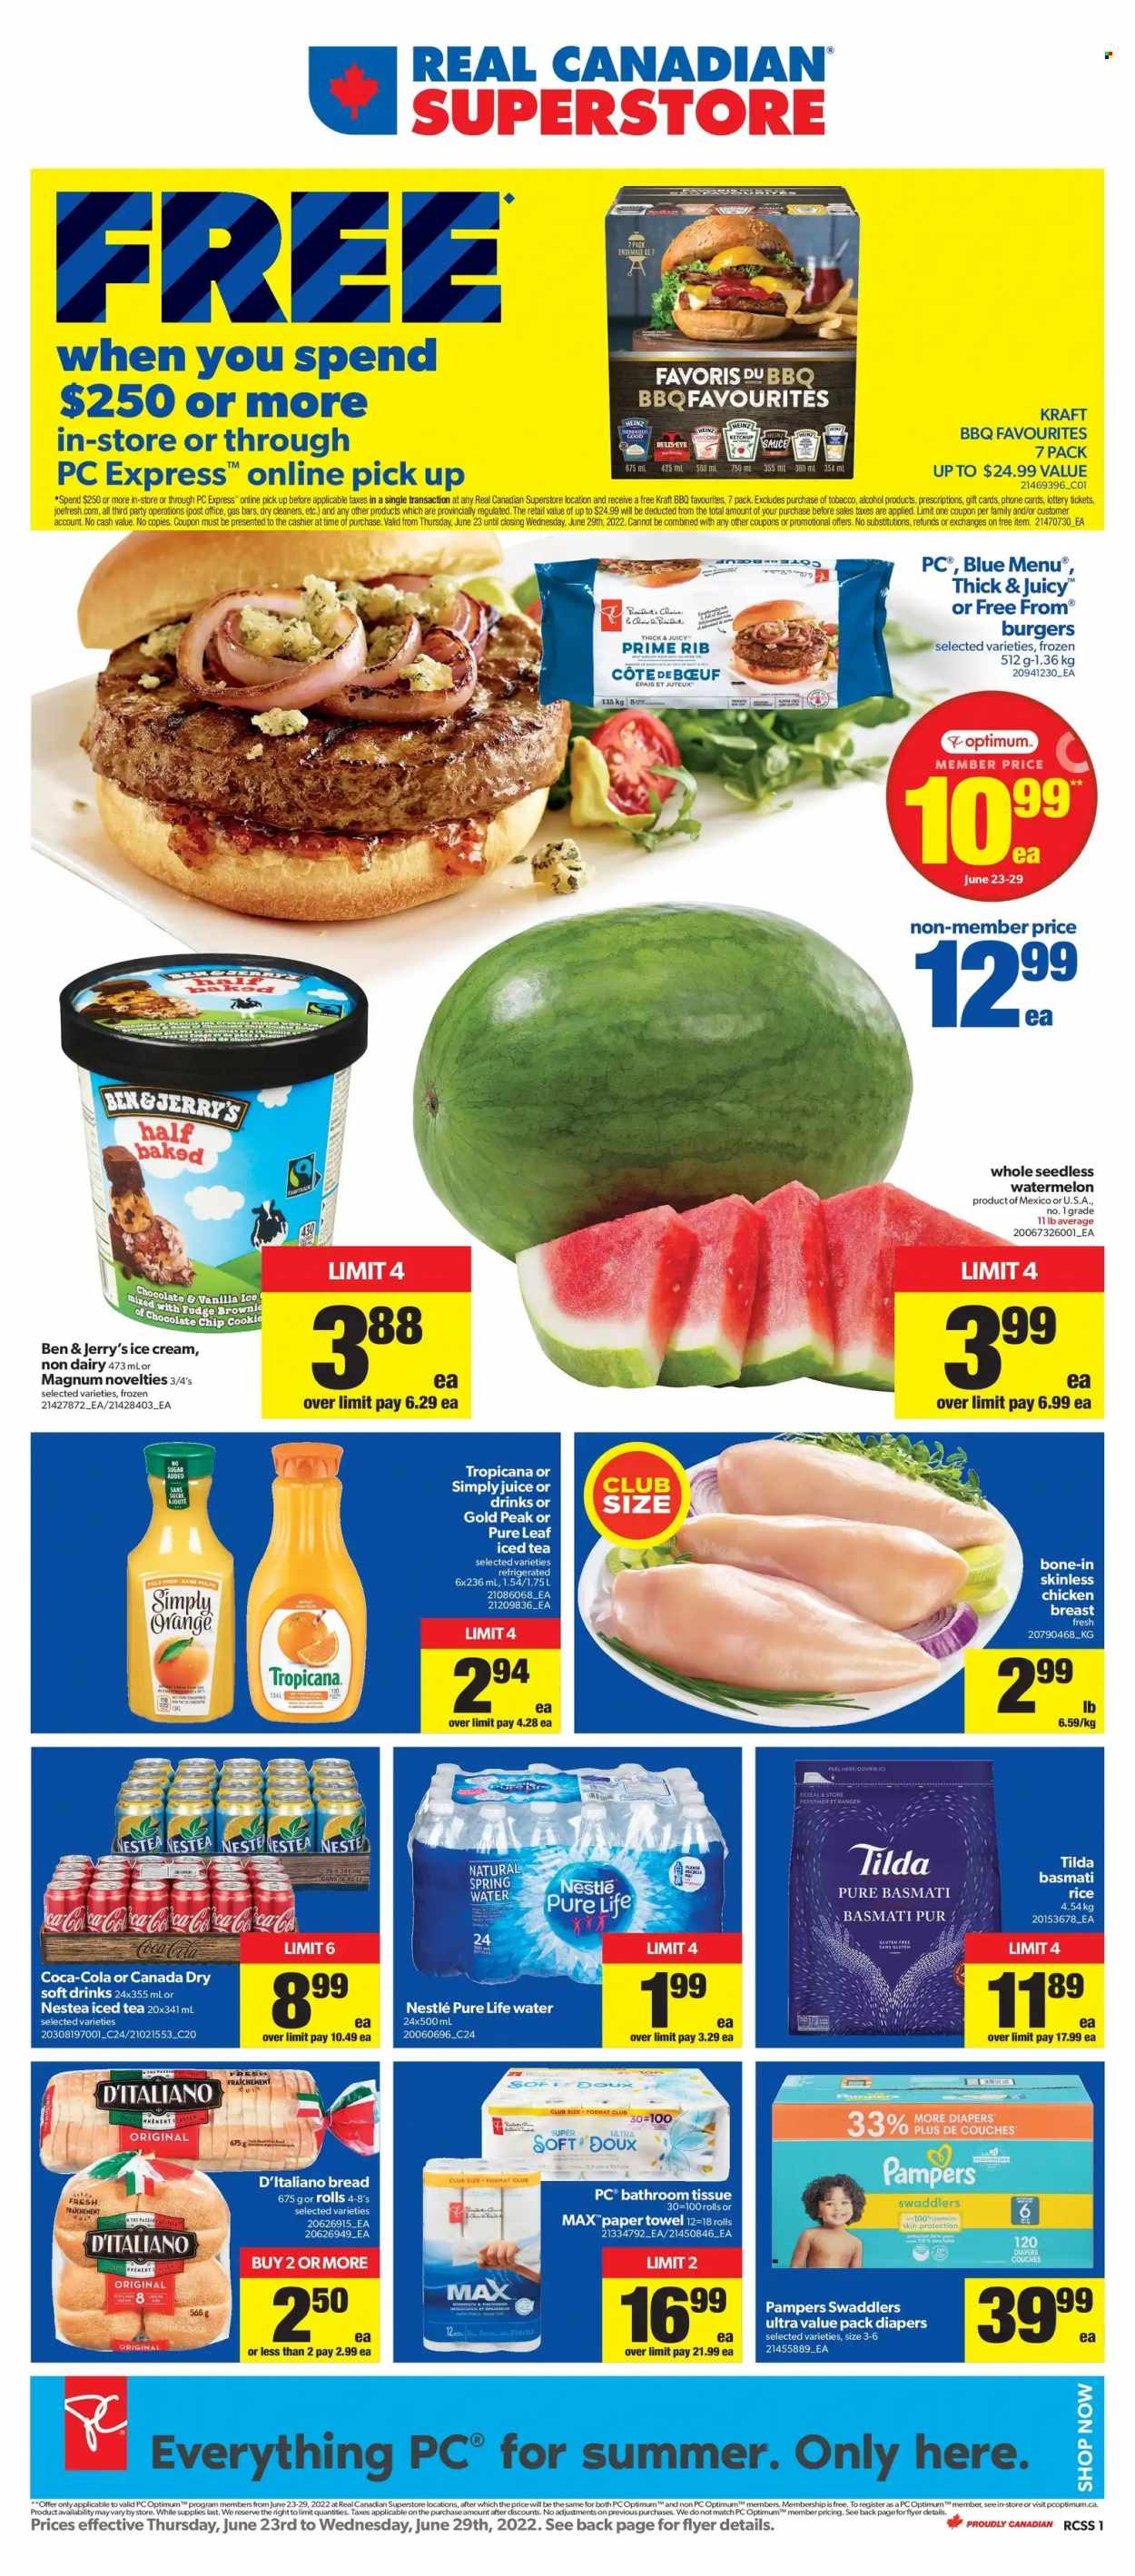 thumbnail - Real Canadian Superstore Flyer - June 23, 2022 - June 29, 2022 - Sales products - bread, watermelon, hamburger, sauce, Kraft®, Président, Magnum, ice cream, Ben & Jerry's, fudge, chocolate chips, basmati rice, rice, Canada Dry, Coca-Cola, juice, ice tea, soft drink, spring water, Pure Life Water, Pure Leaf, alcohol, chicken breasts, chicken, nappies, bath tissue, paper towels, Optimum, Nestlé, Heinz, Pampers. Page 1.